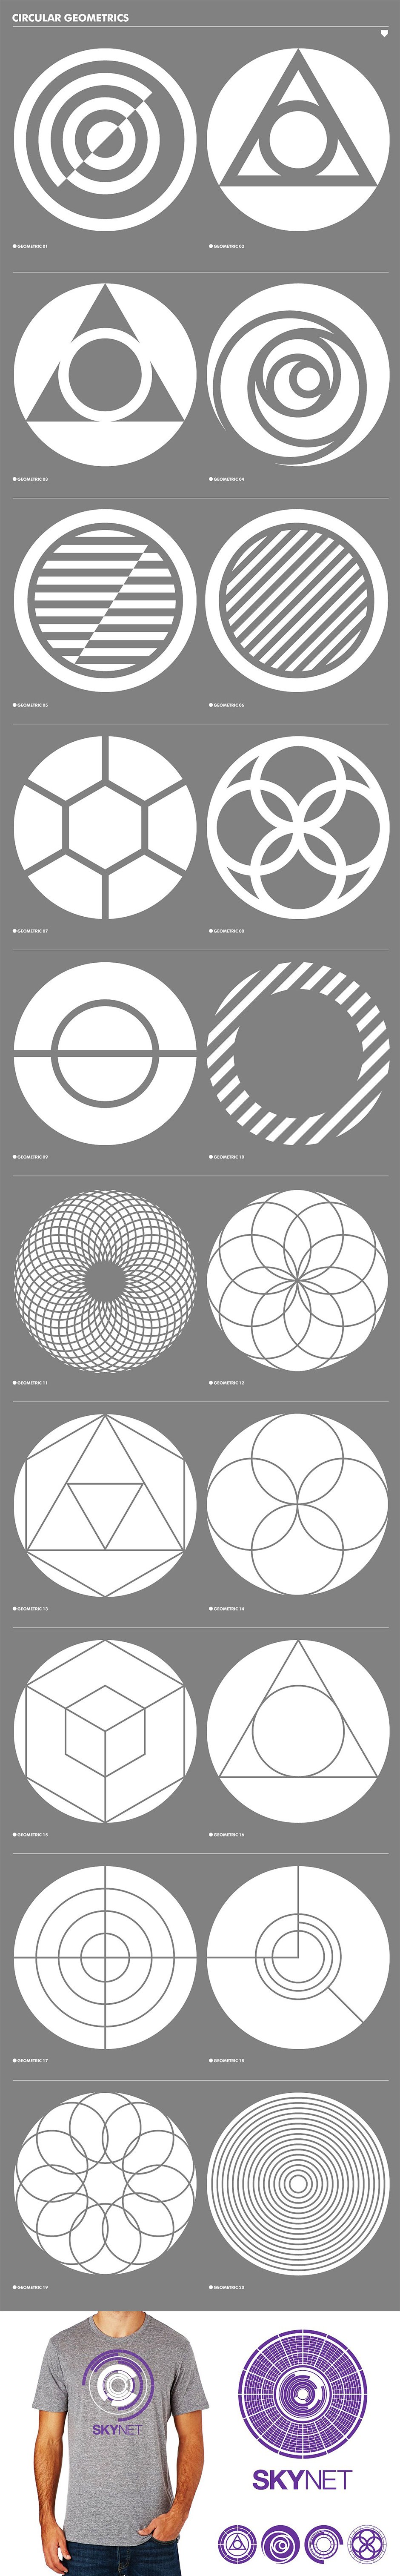 The Totally Diverse Vectors Collection